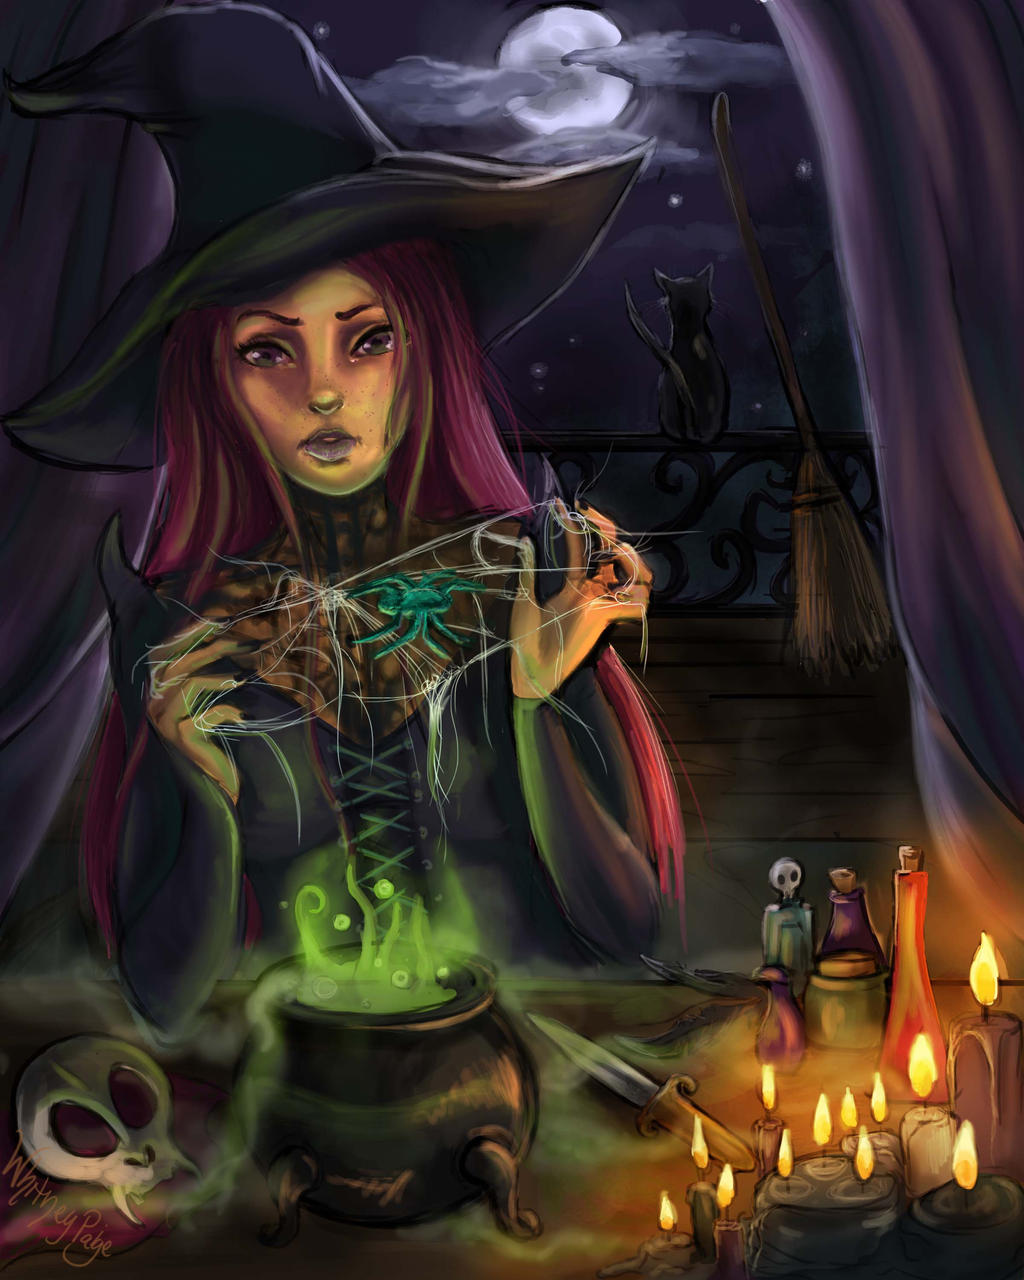 The Worst Witch by Wipaige on DeviantArt